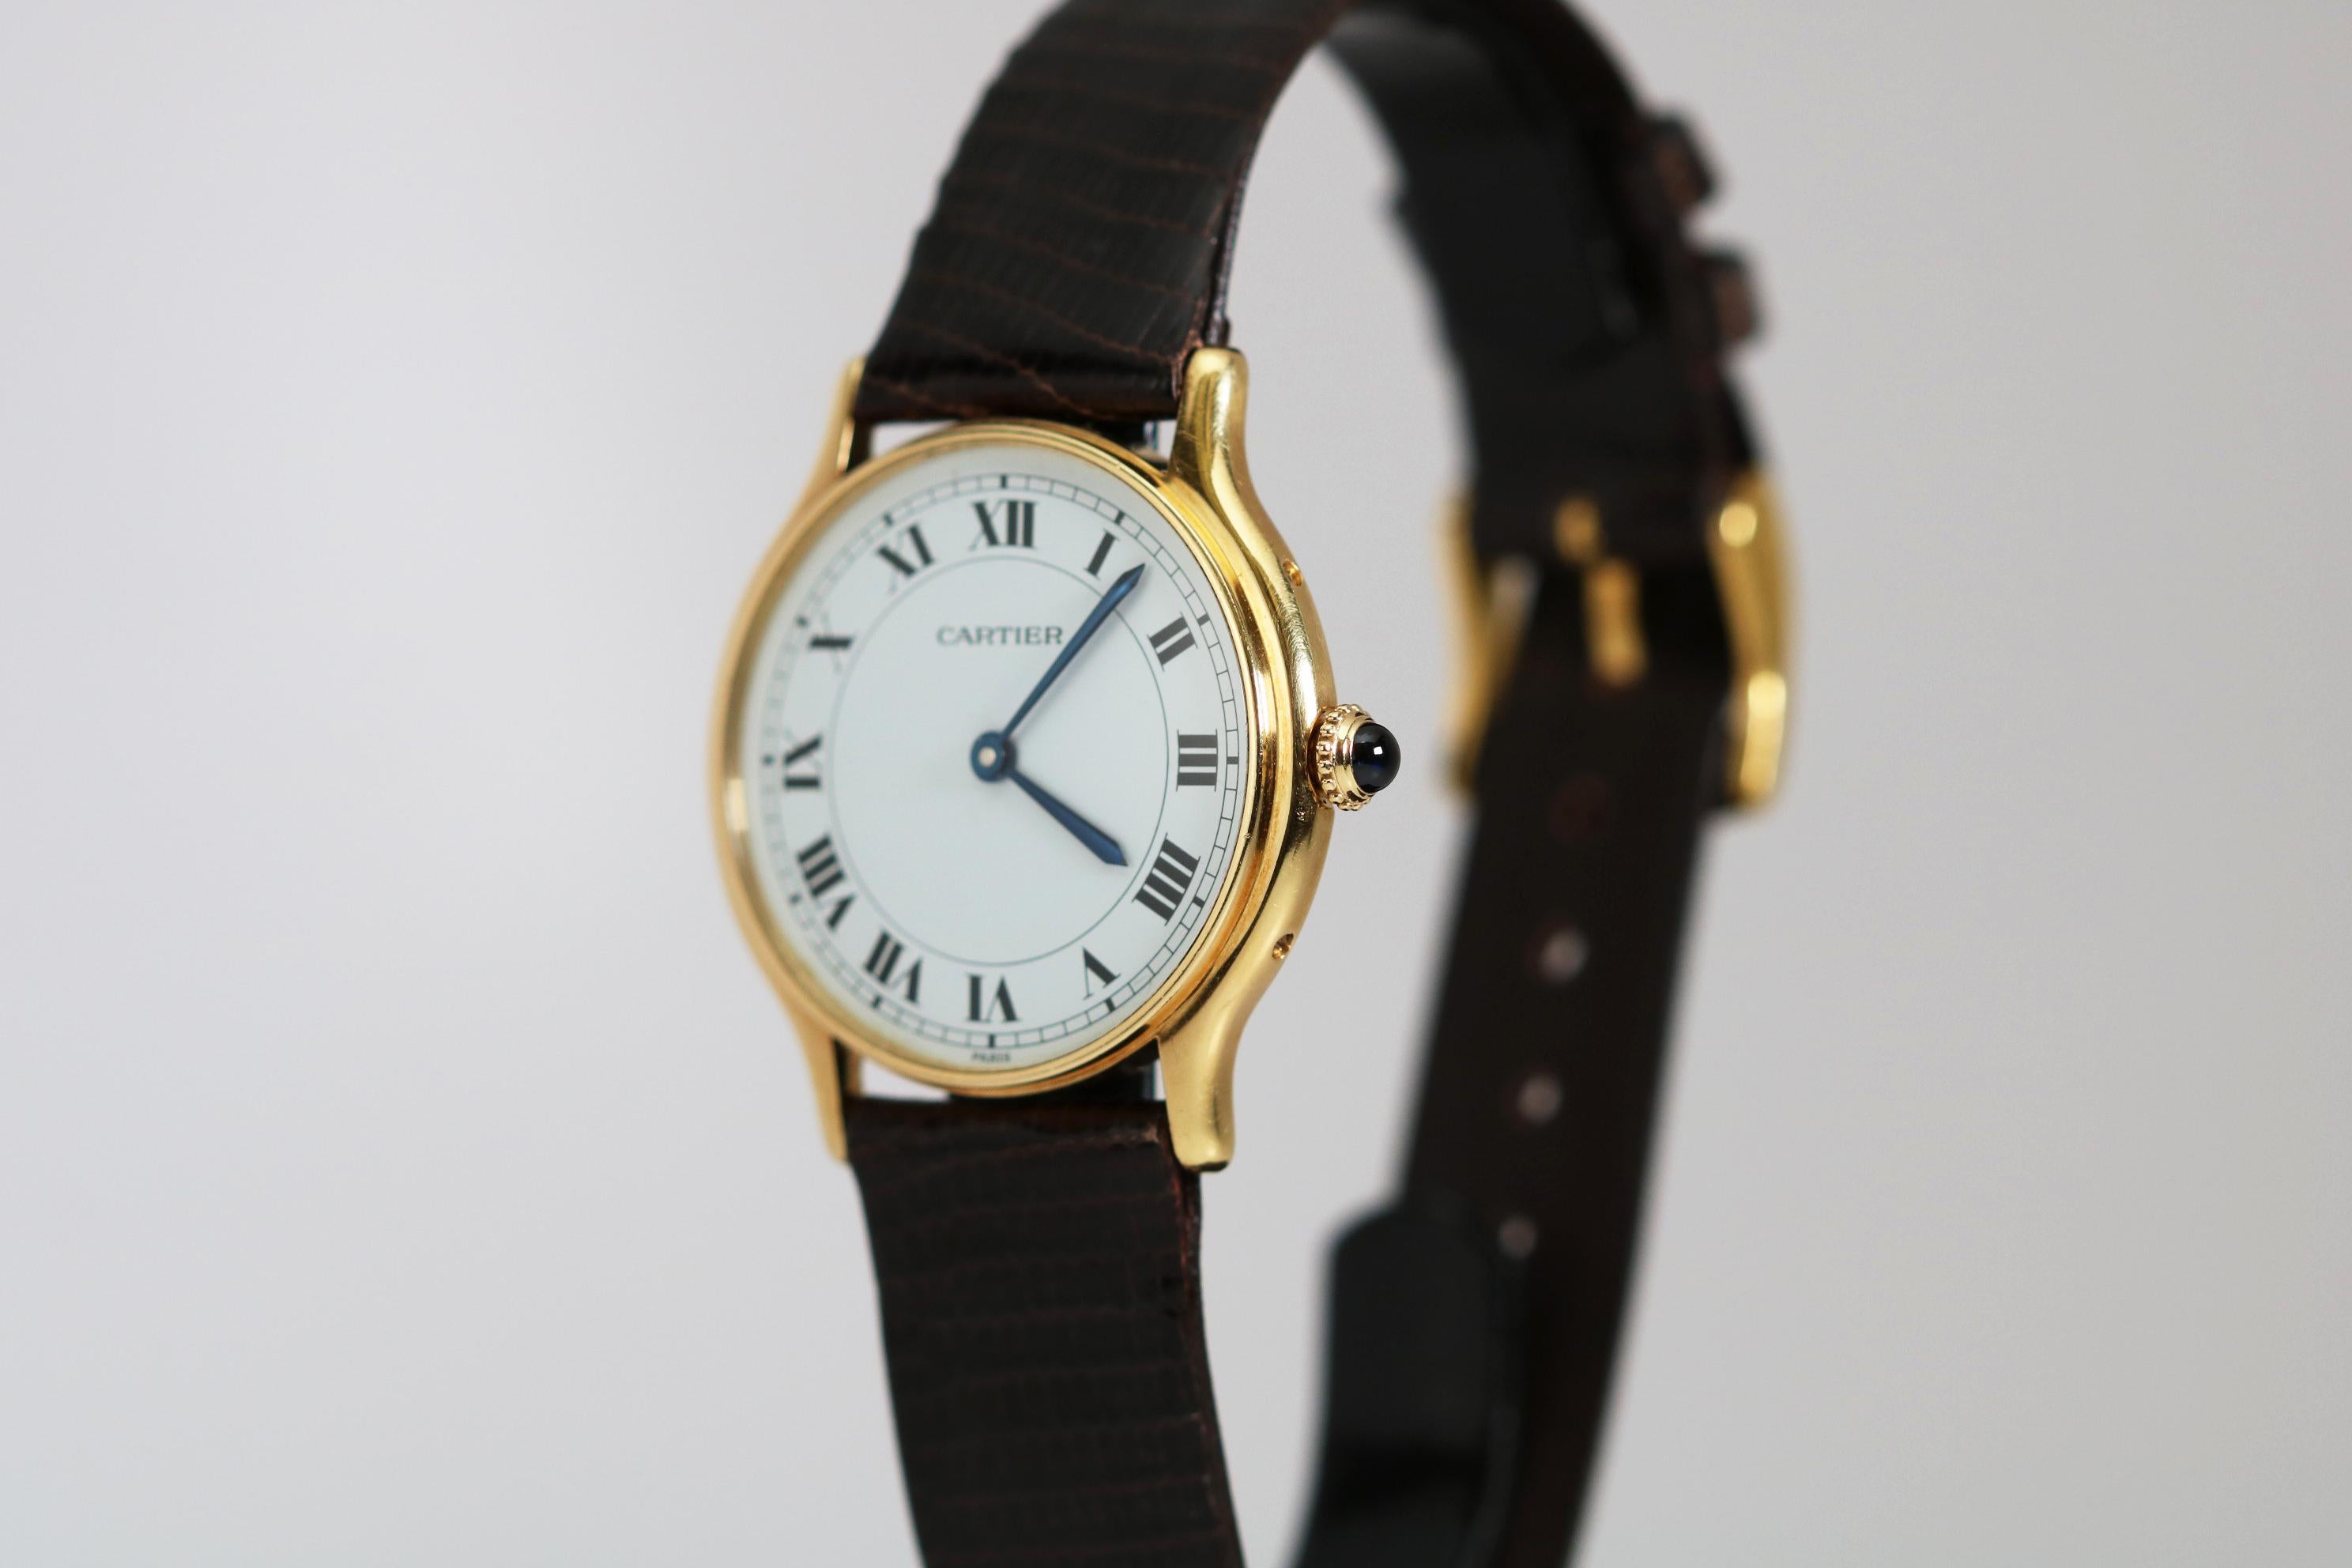 Brand: Cartier Paris
Model/Ref: Dress
Movement: Cartier Manual Wind 17-Jewels
Case: 18k Yellow Gold
Dial: White with Roman Numerals Stamped Paris
Dimensions: 30mm
Band: Brown Lizard made in Italy
Lug Width: 16mm
Year: 1980s
Box/Papers: No